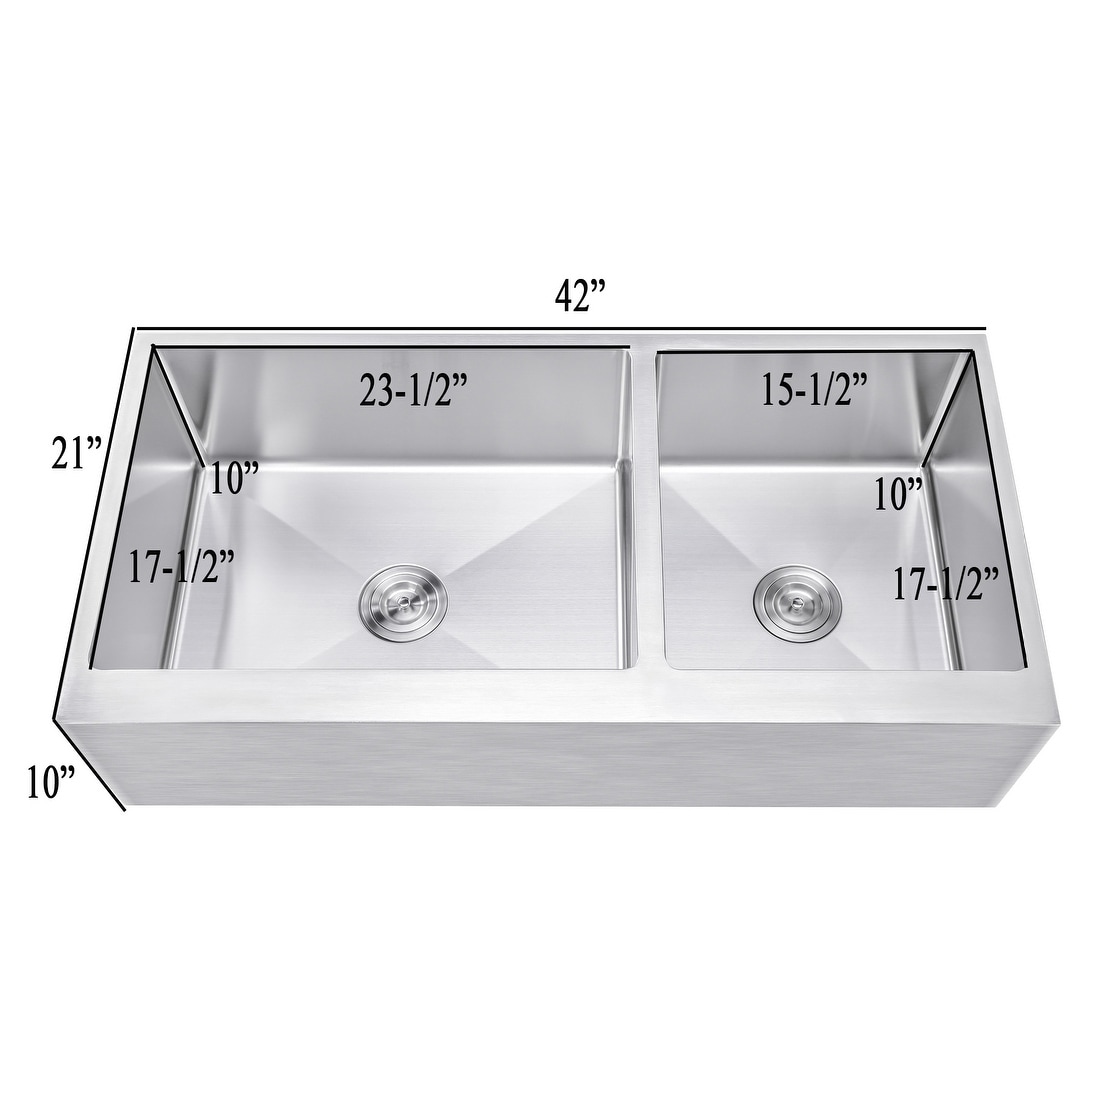 Ariel 42 Inch 60 40 Offset Double Bowl Stainless Steel Farmhouse Sink Flat Apron Front 15mm Radius Coved Corners